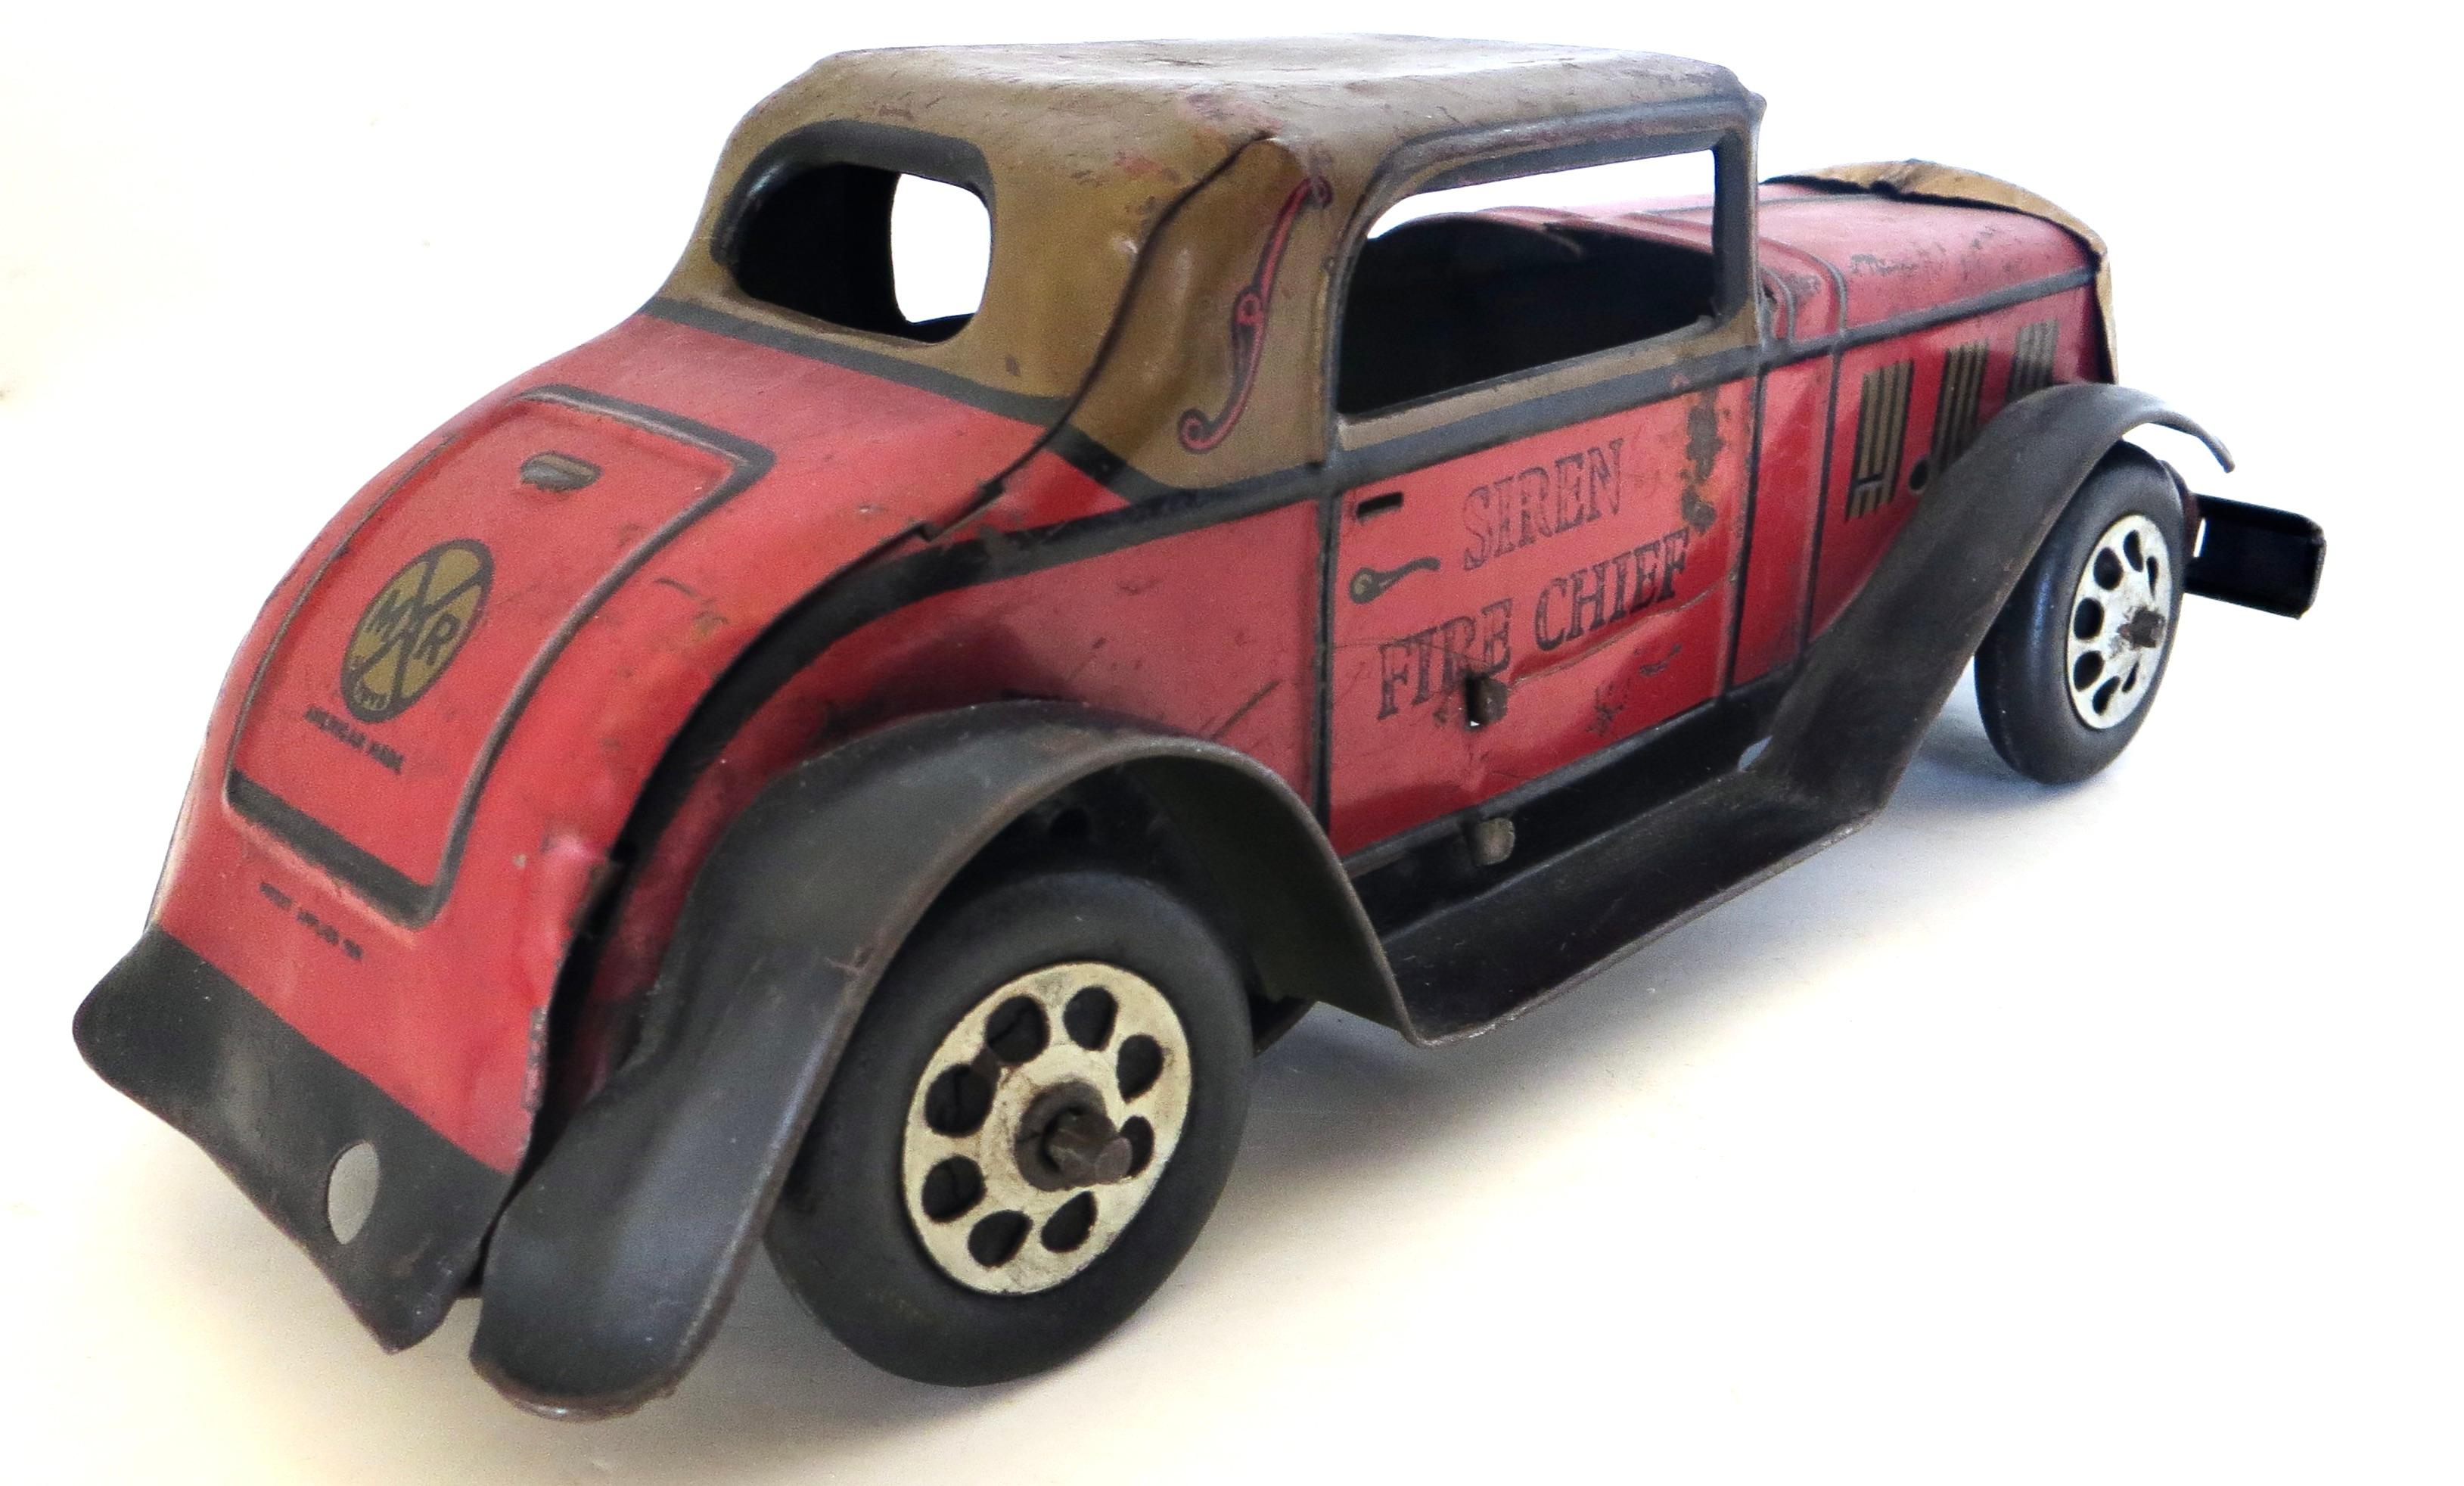 Metalwork Vintage Marx Fire Chief Friction Action Toy Sedan American, Circa 1930 For Sale